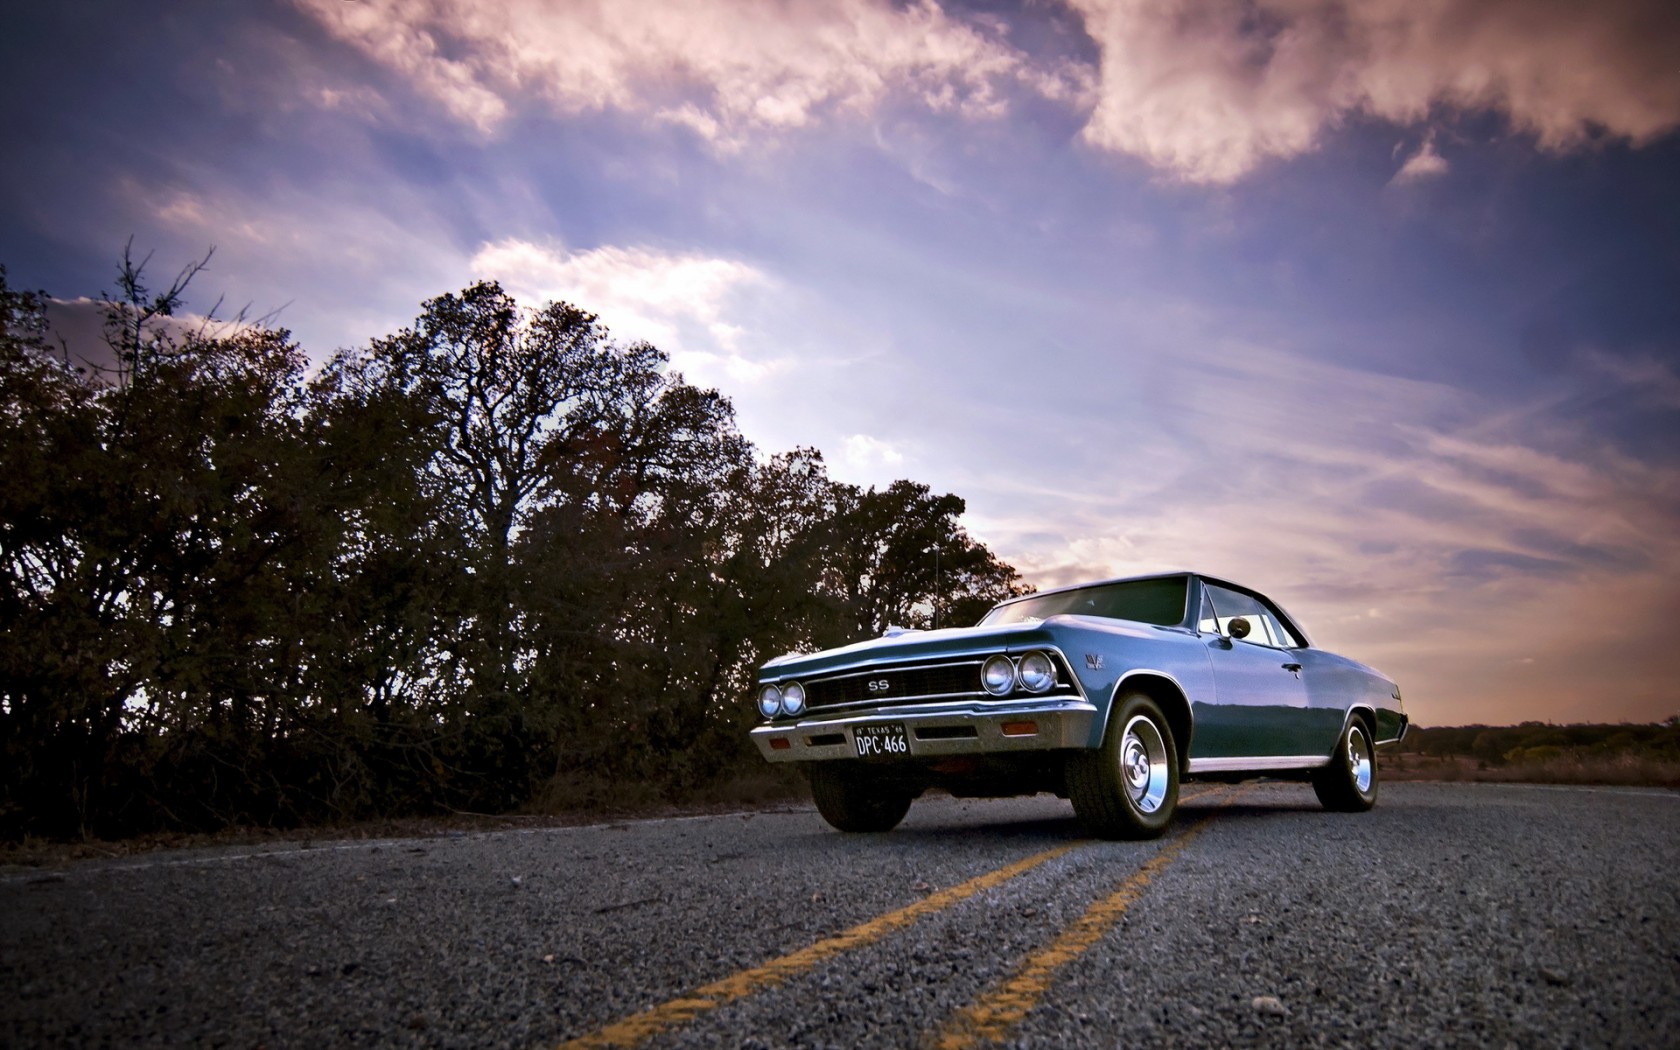 1966 Chevrolet Chevelle SS Wallpaper and Background Image